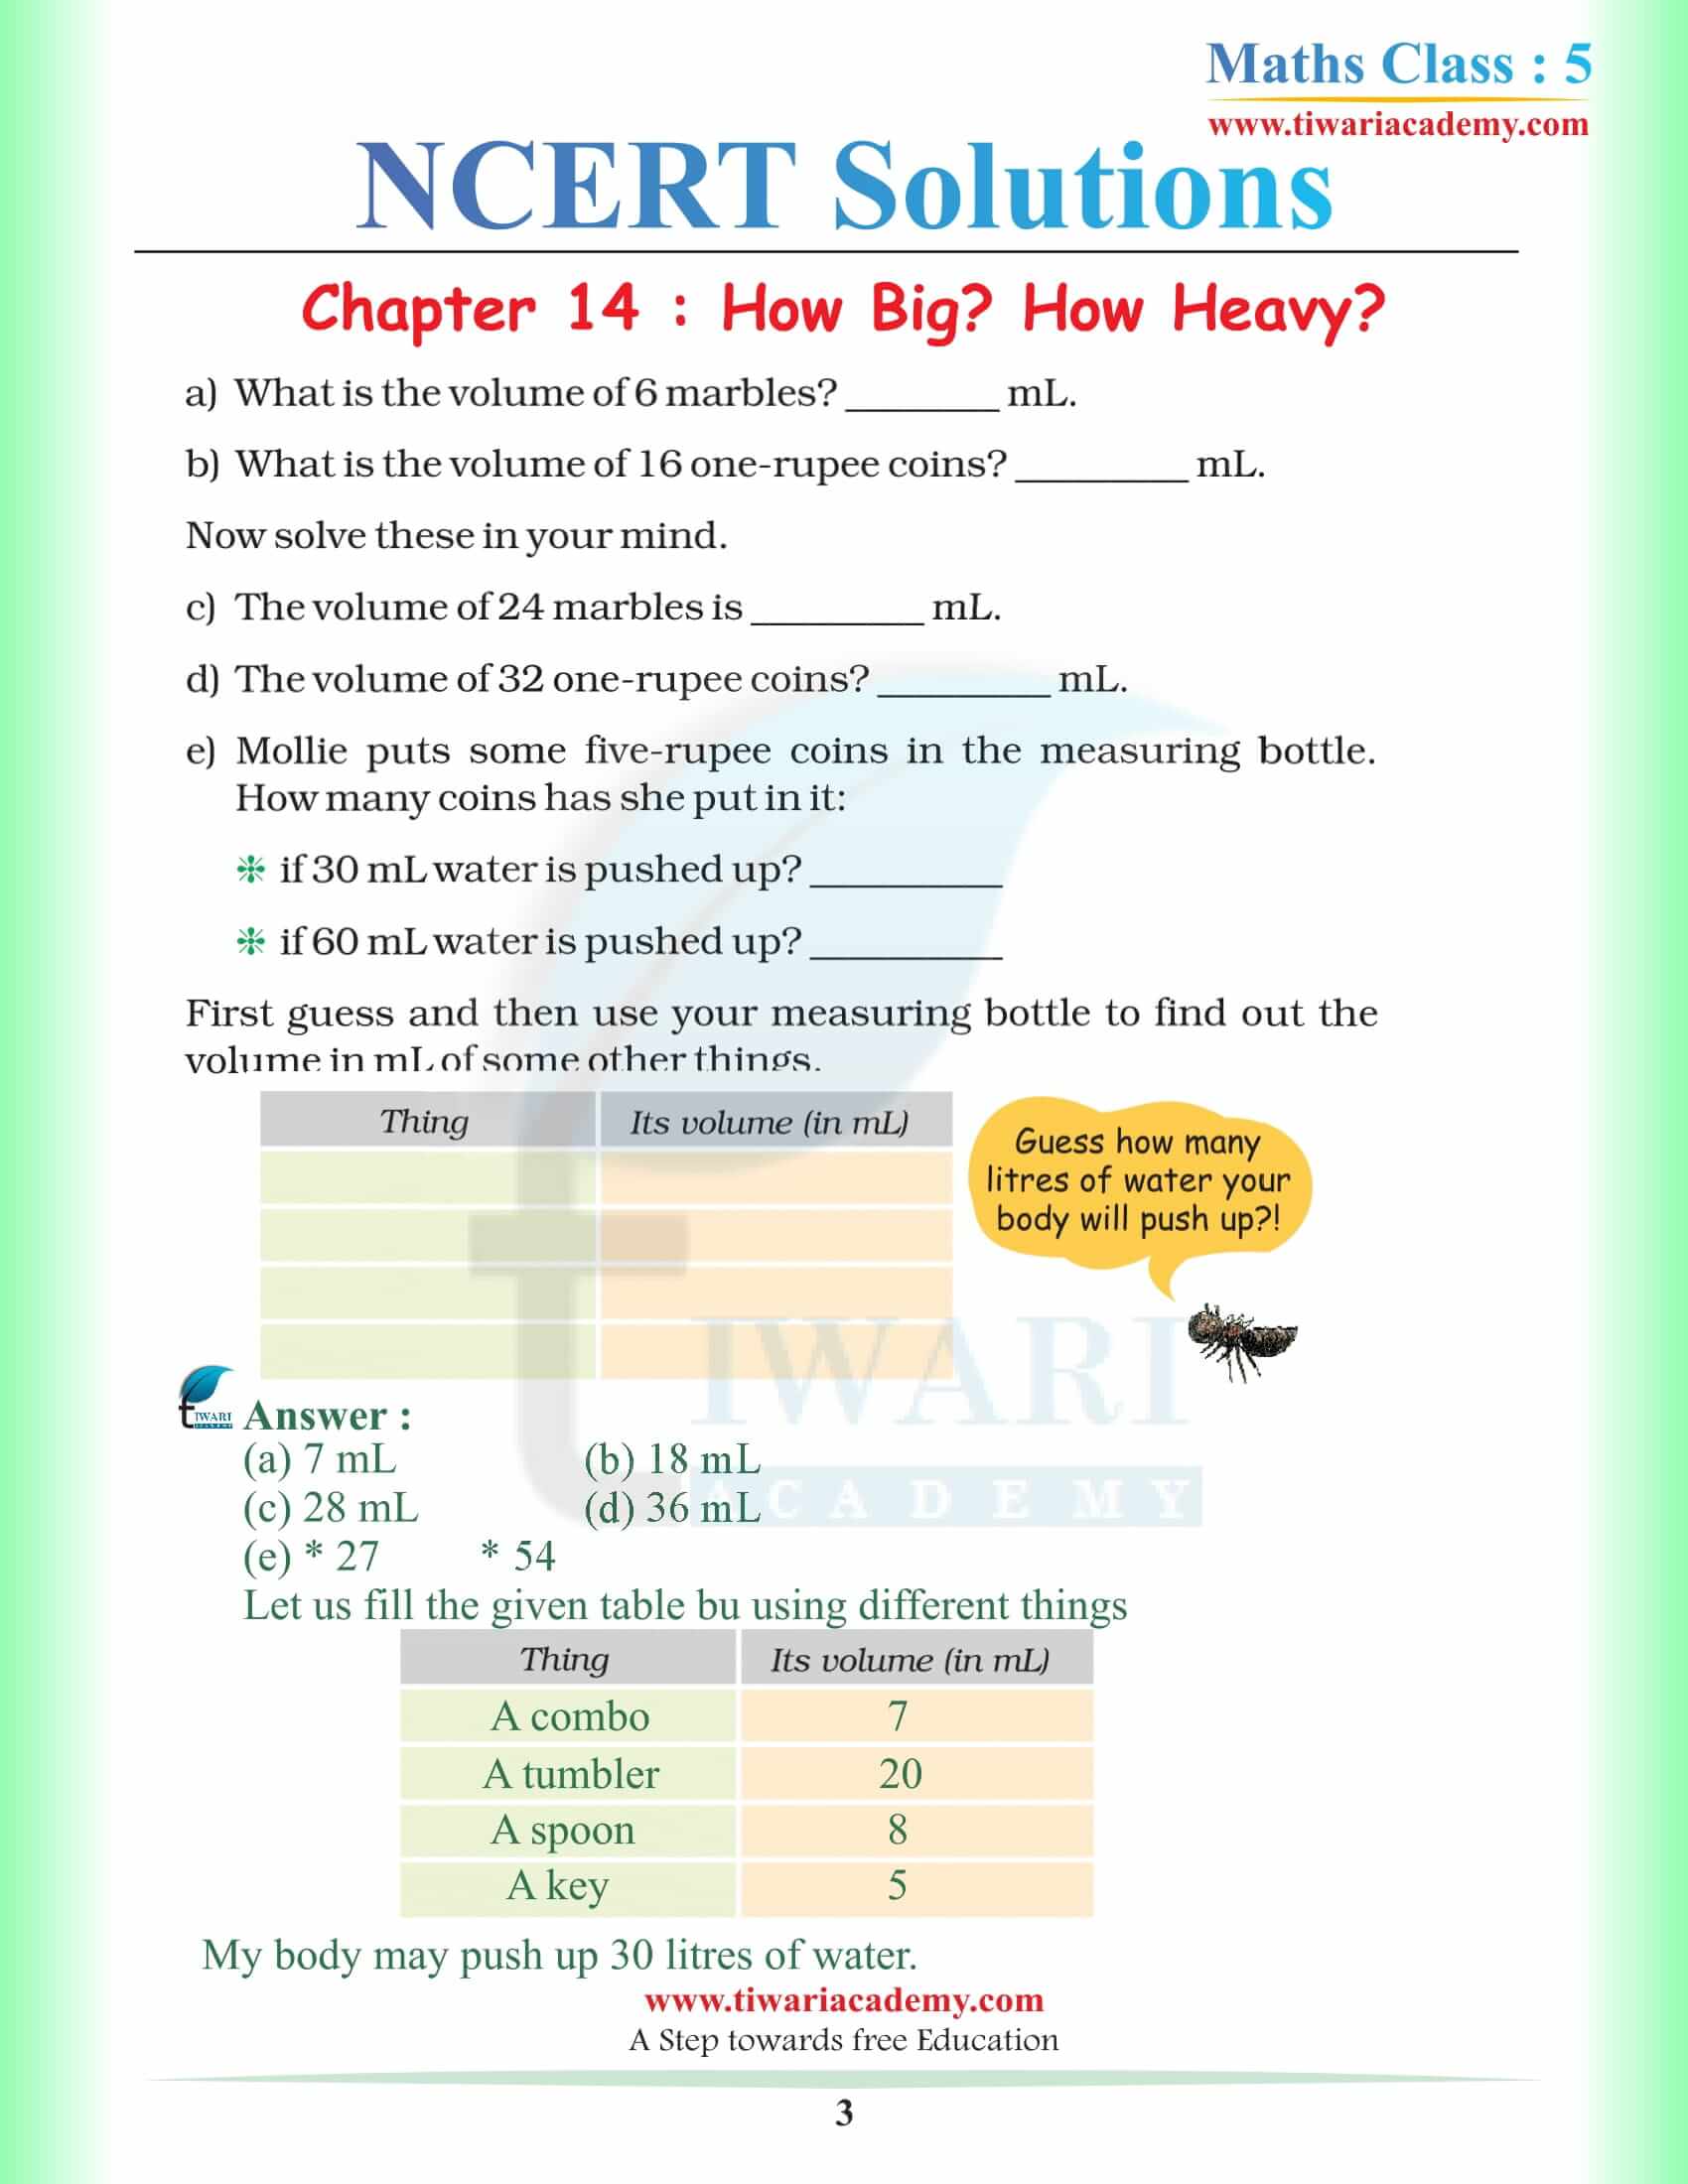 NCERT Solutions for Class 5 Maths Chapter 14 in English Medium